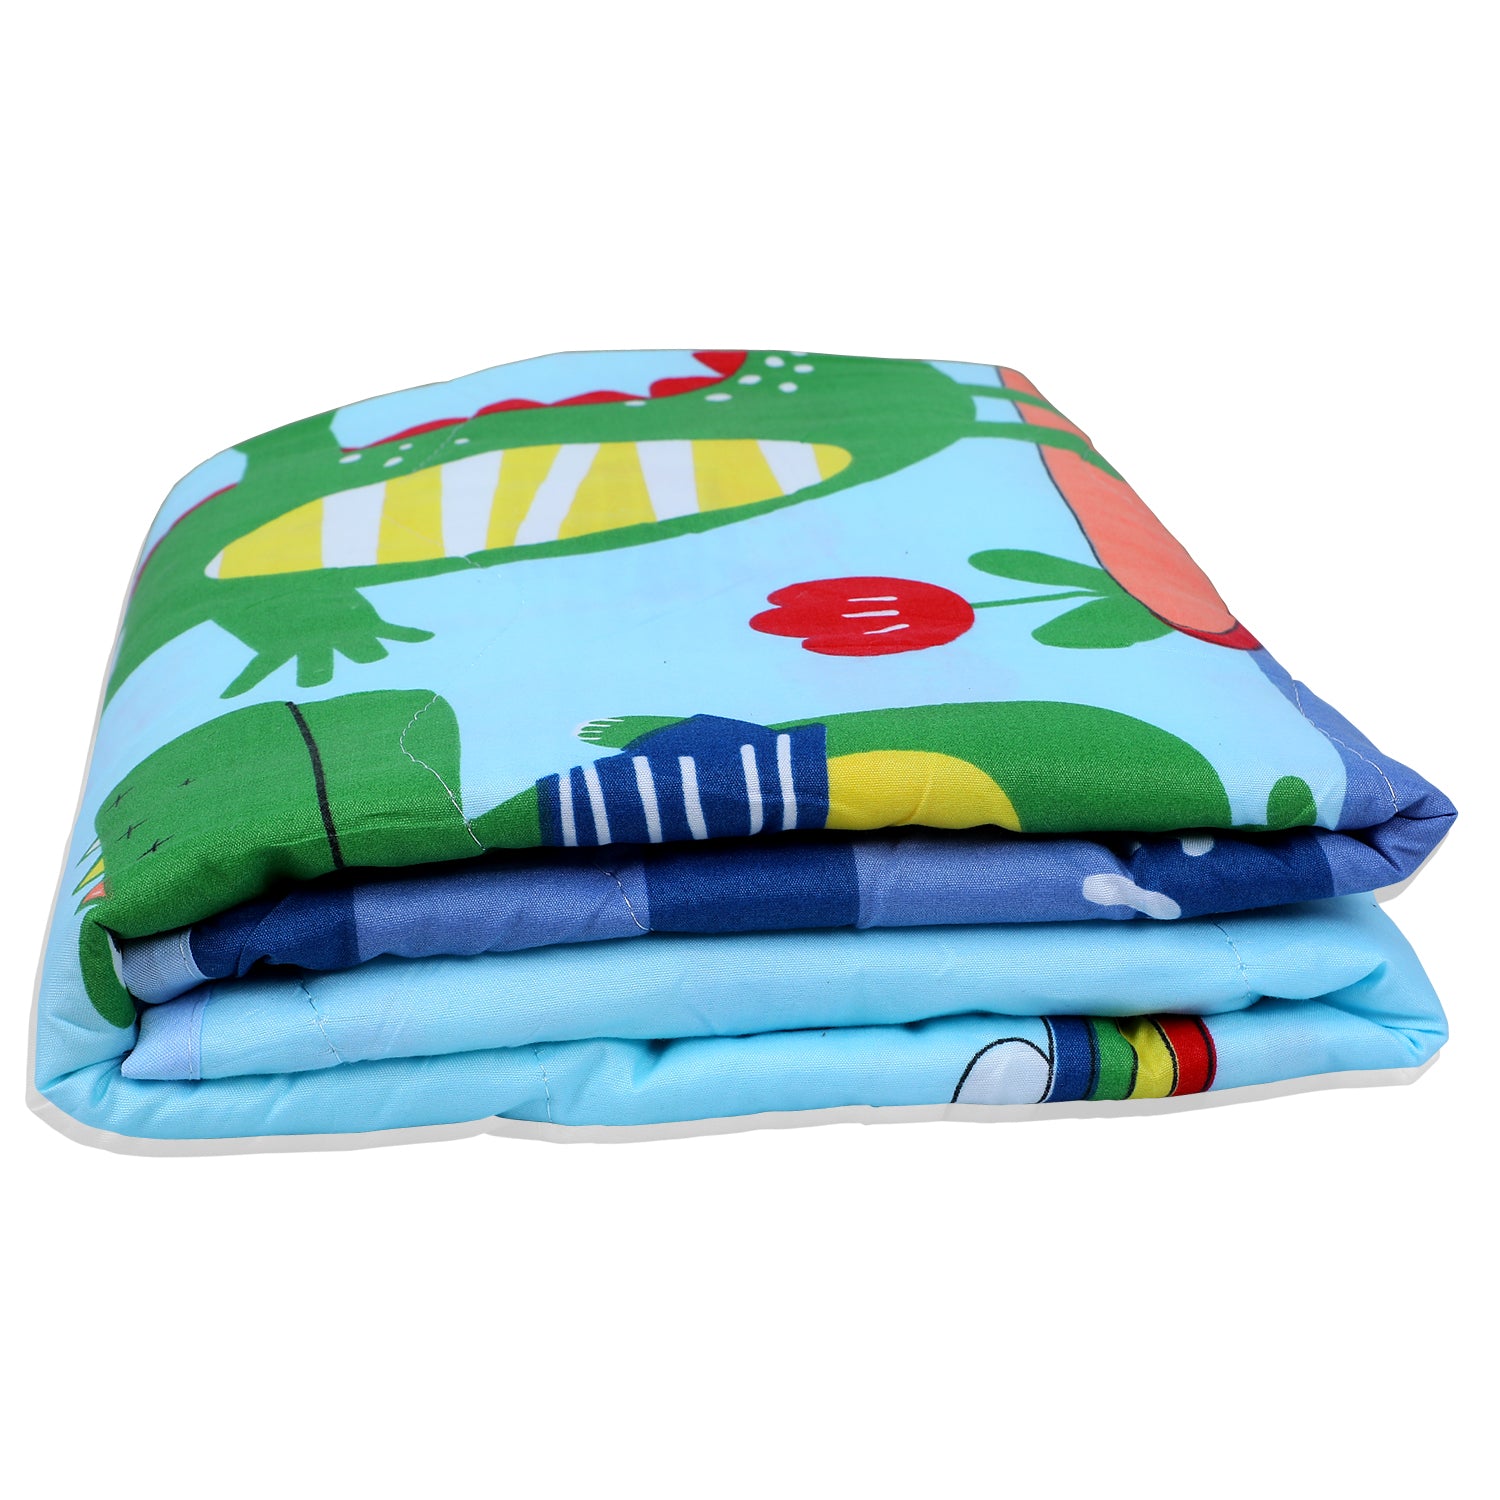 Baby Moo Cool Crocodile Soft Quilted Premium Reversible Blanket - Blue